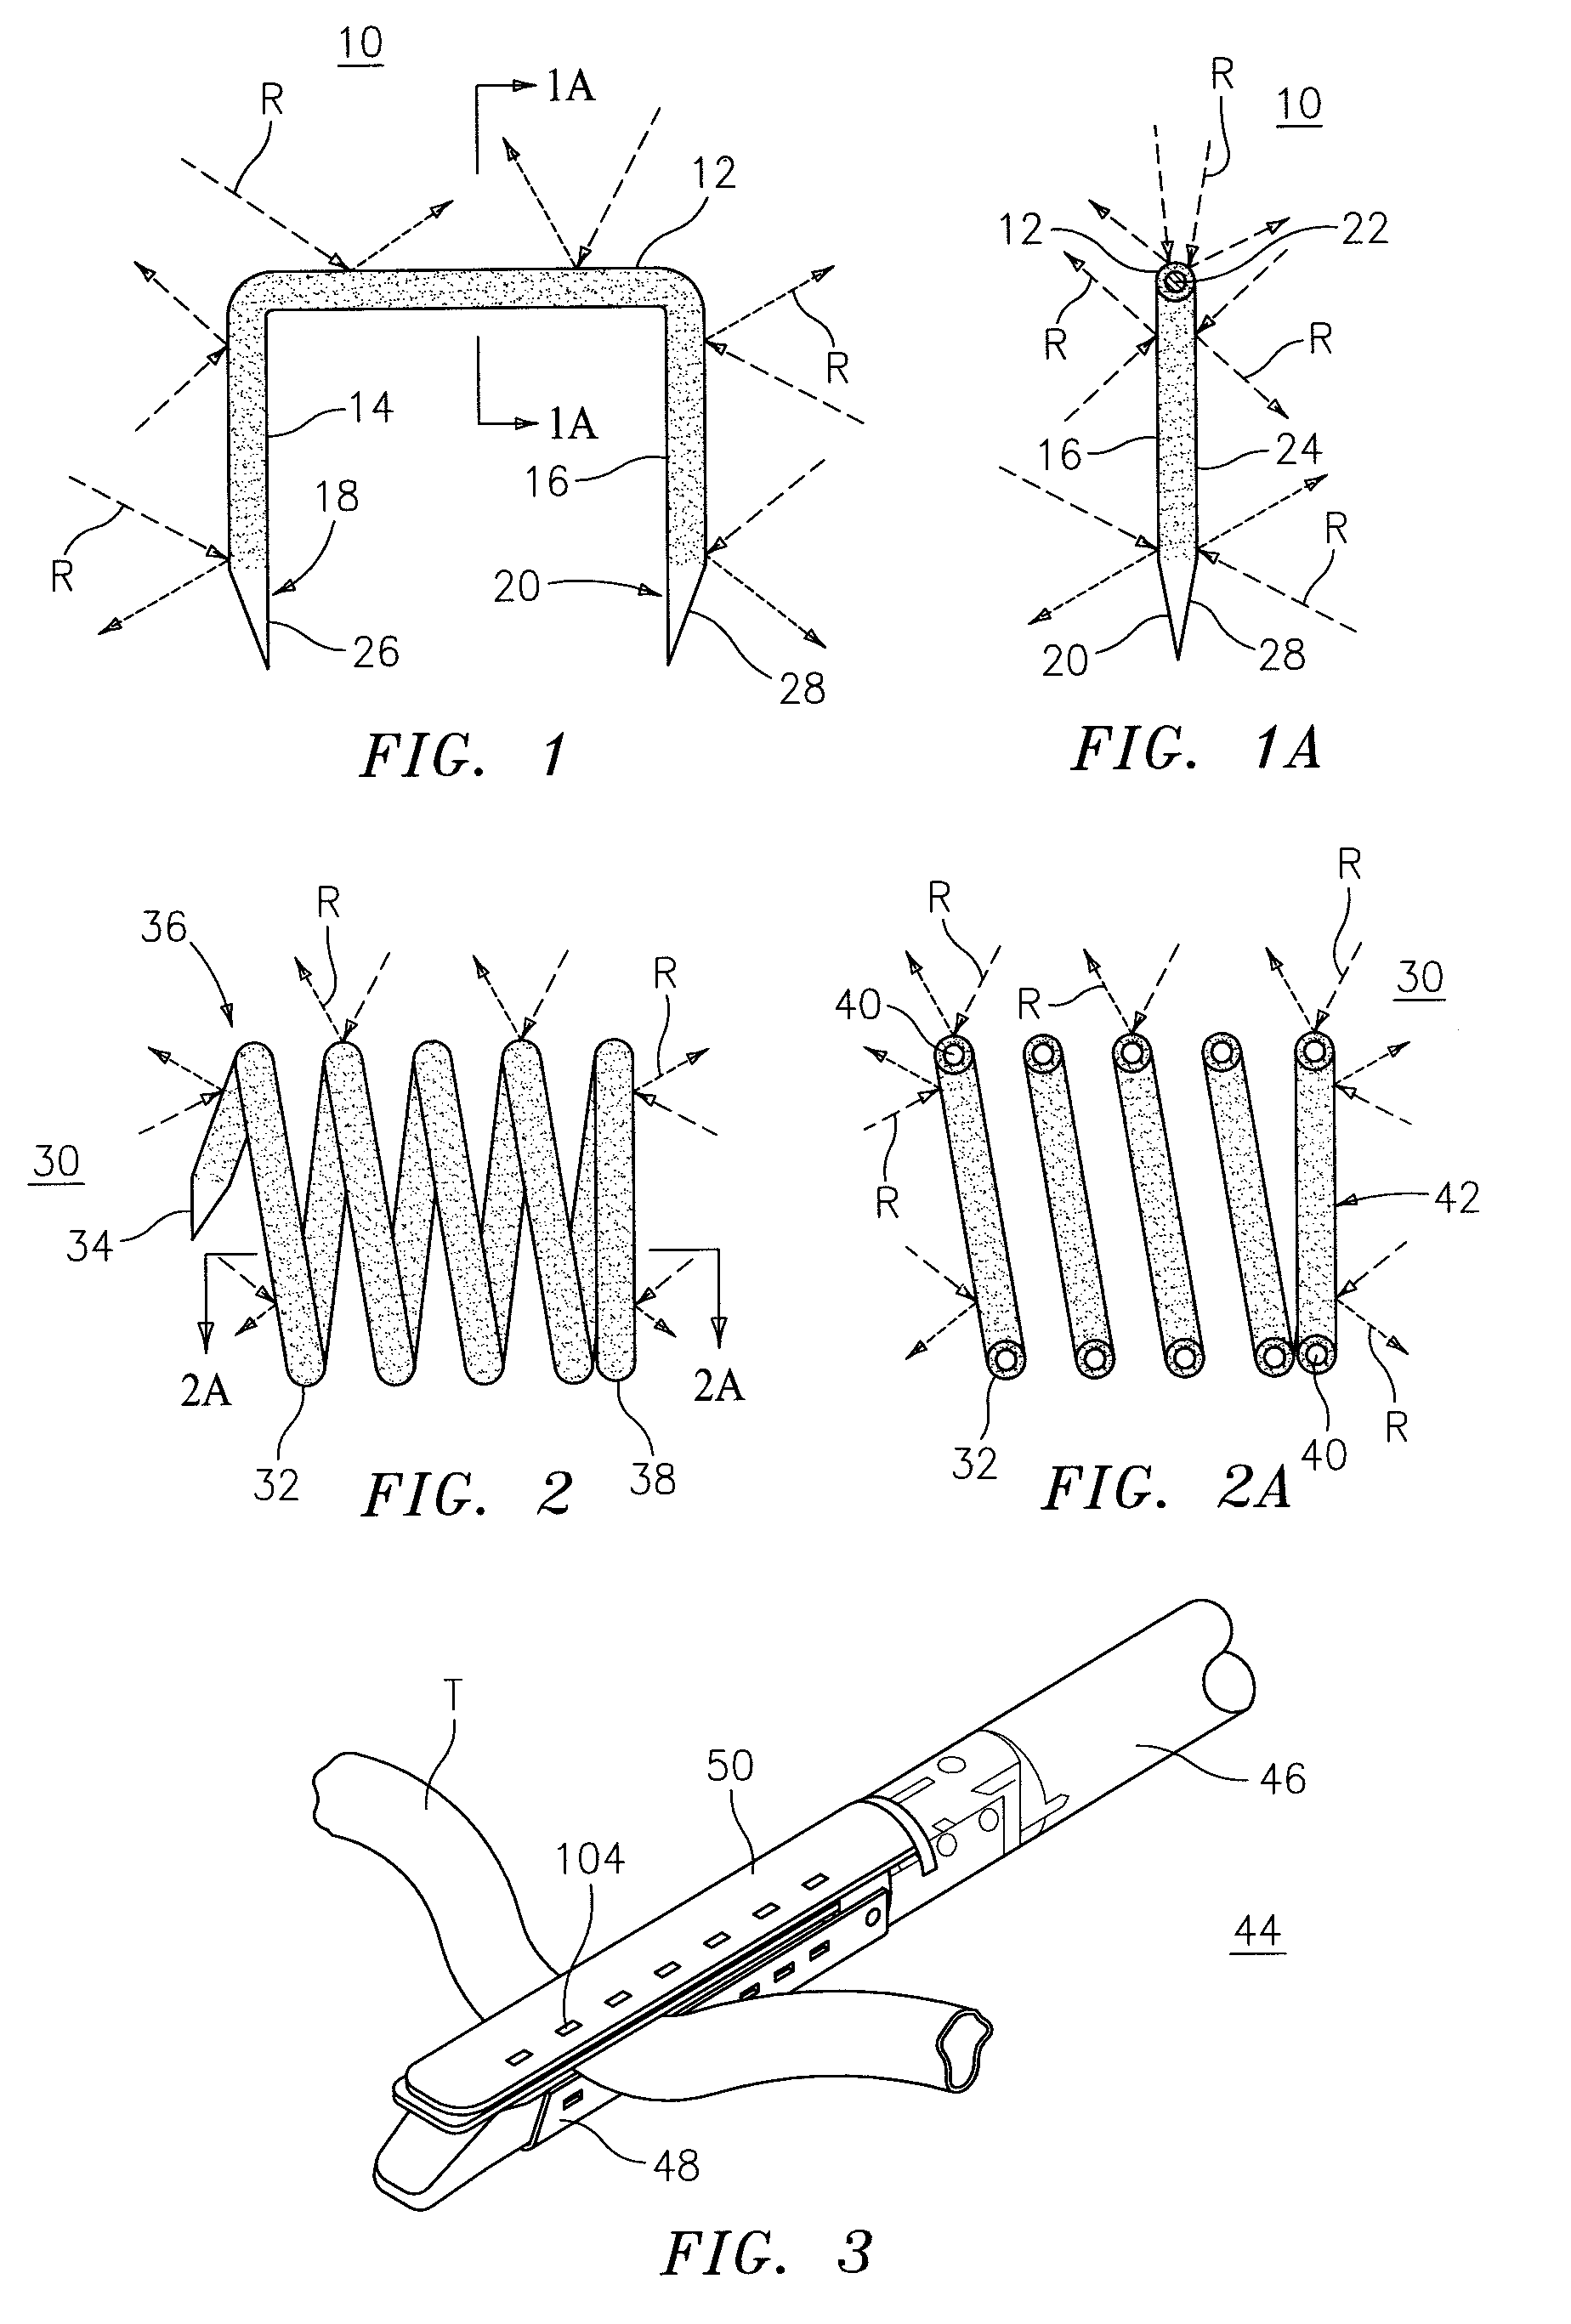 Coated surgical staples and an illuminated staple cartridge for a surgical stapling instrument